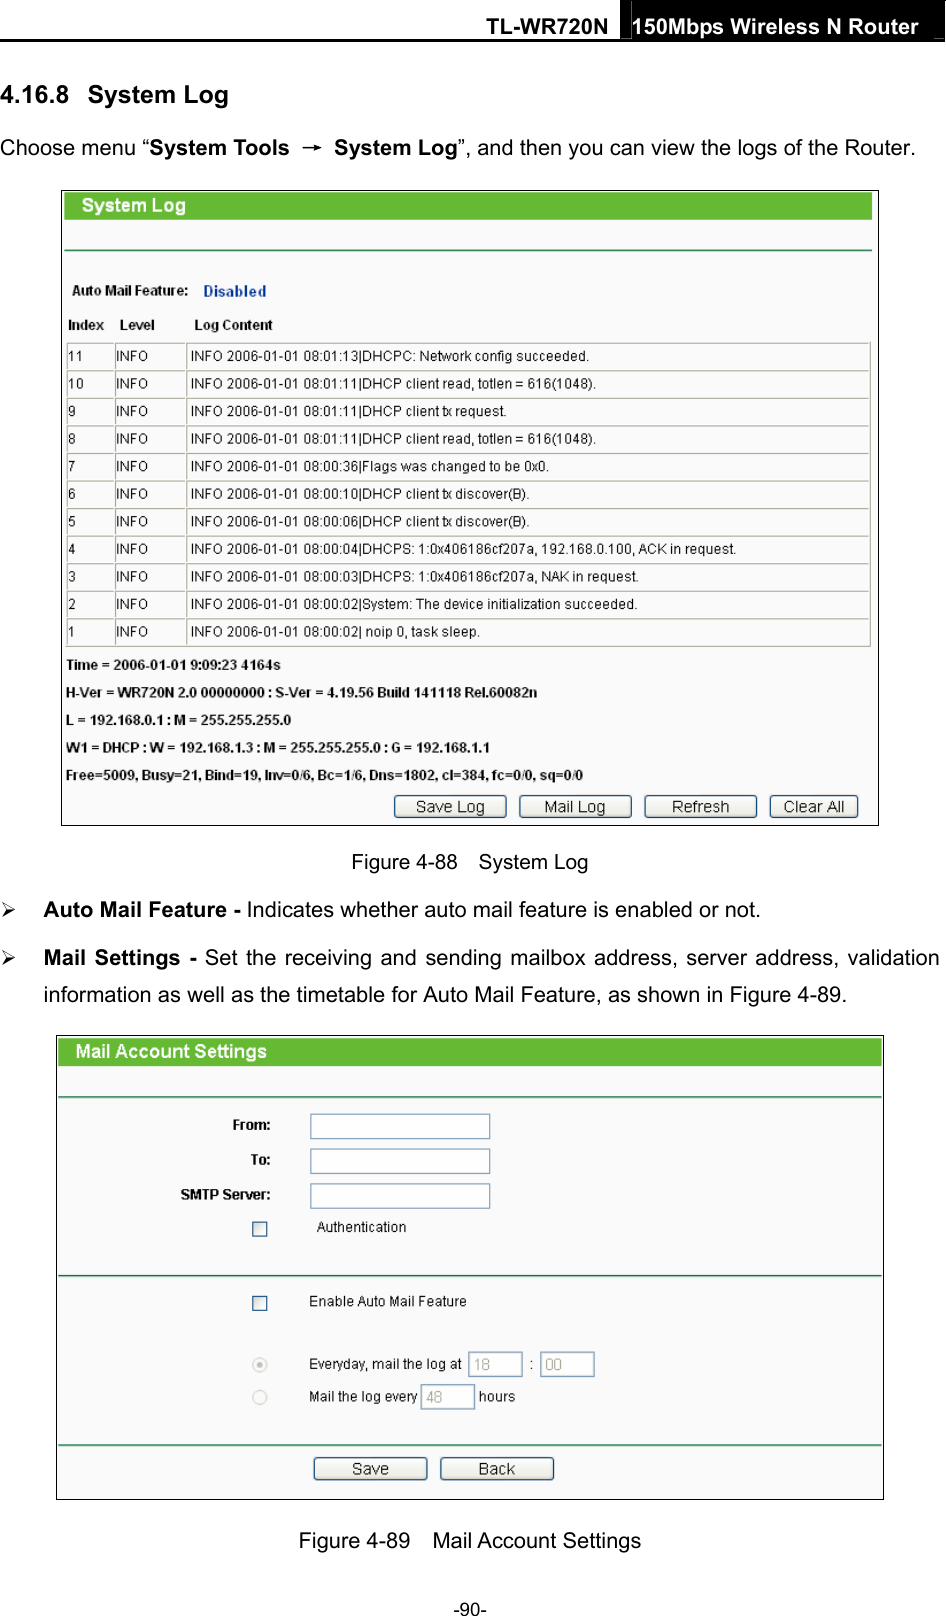 TL-WR720N 150Mbps Wireless N Router  4.16.8  System Log Choose menu “System Tools  → System Log”, and then you can view the logs of the Router.  Figure 4-88  System Log  Auto Mail Feature - Indicates whether auto mail feature is enabled or not.    Mail Settings - Set the receiving and sending mailbox address, server address, validation information as well as the timetable for Auto Mail Feature, as shown in Figure 4-89.  Figure 4-89  Mail Account Settings -90- 